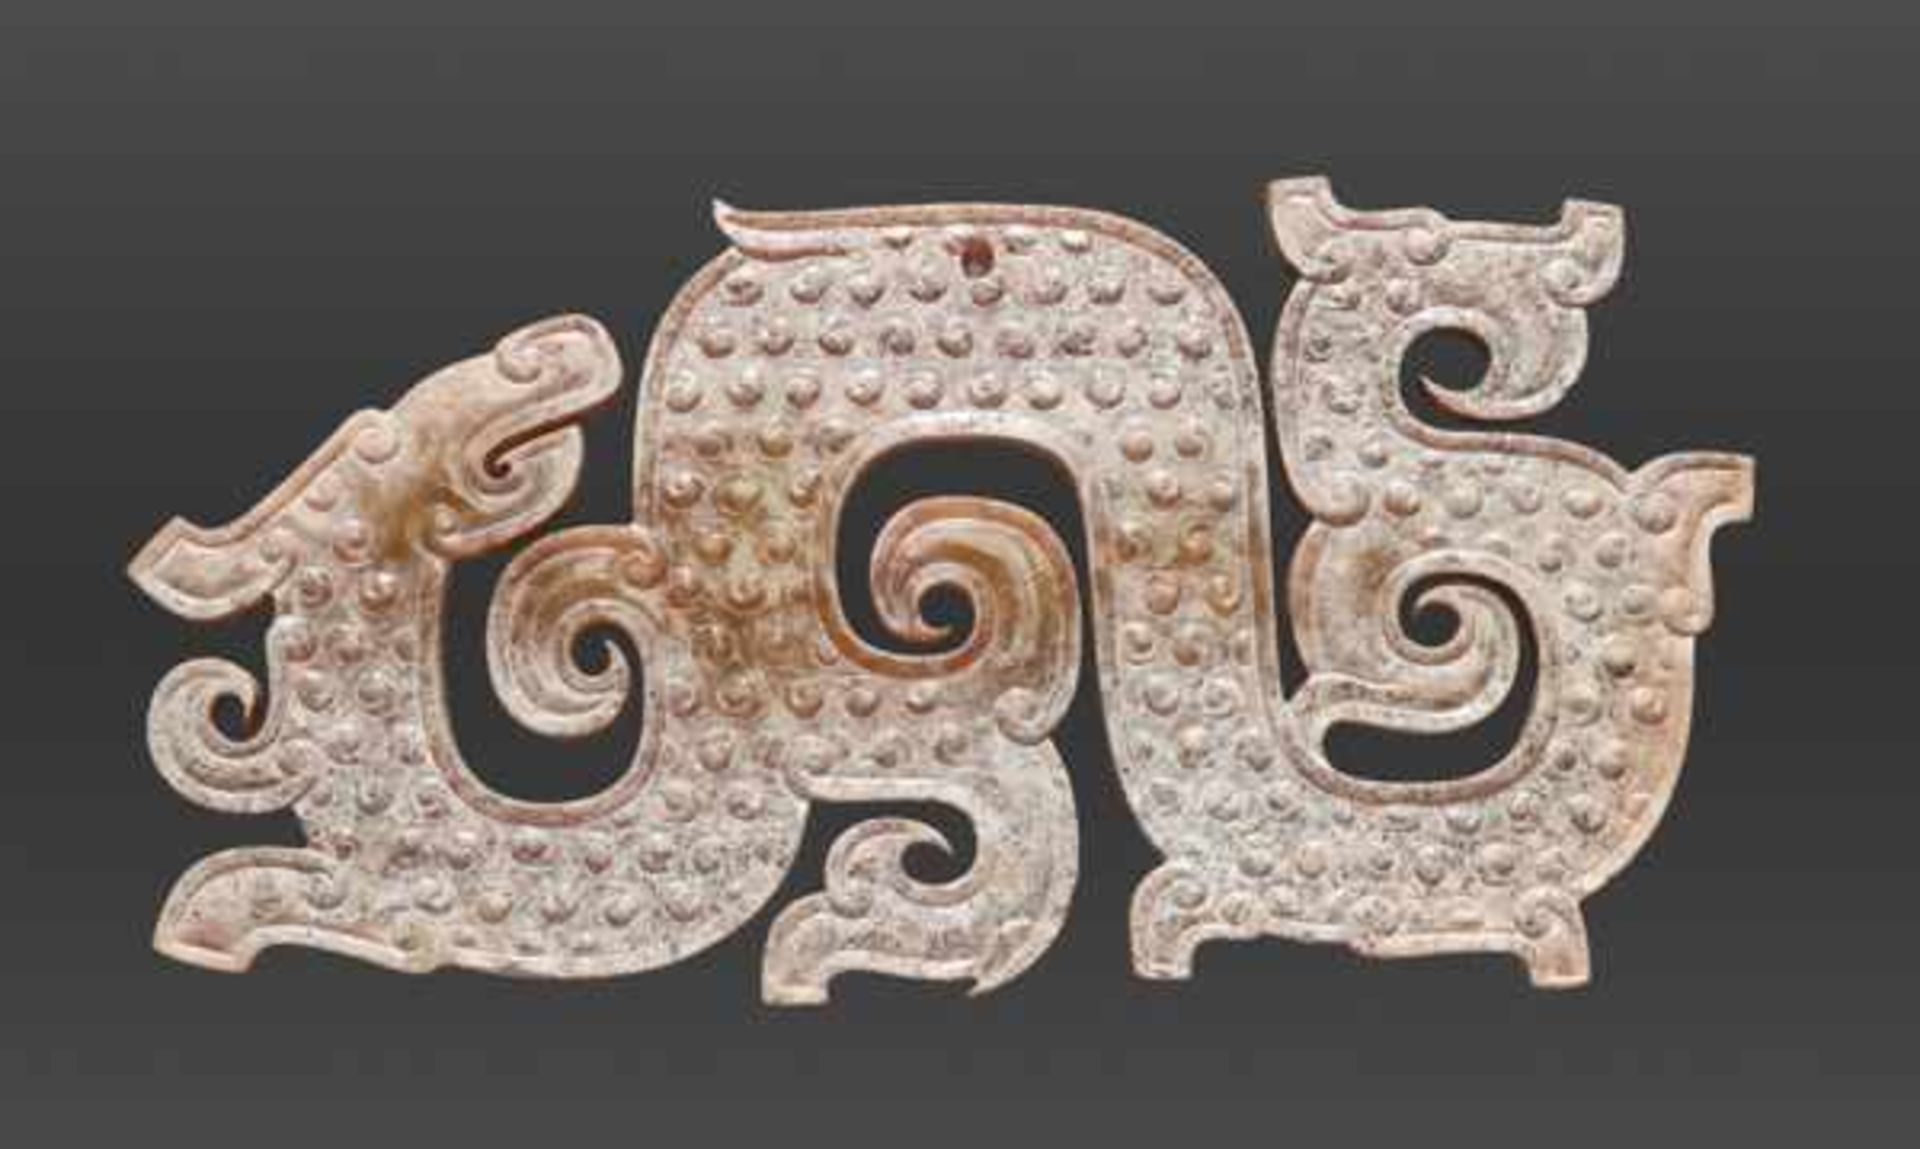 AN ELABORATE DRAGON-SHAPED PENDANT WITH CURLED APPENDAGES Jade, China. Eastern Zhou, 5th - 4th - Image 2 of 4